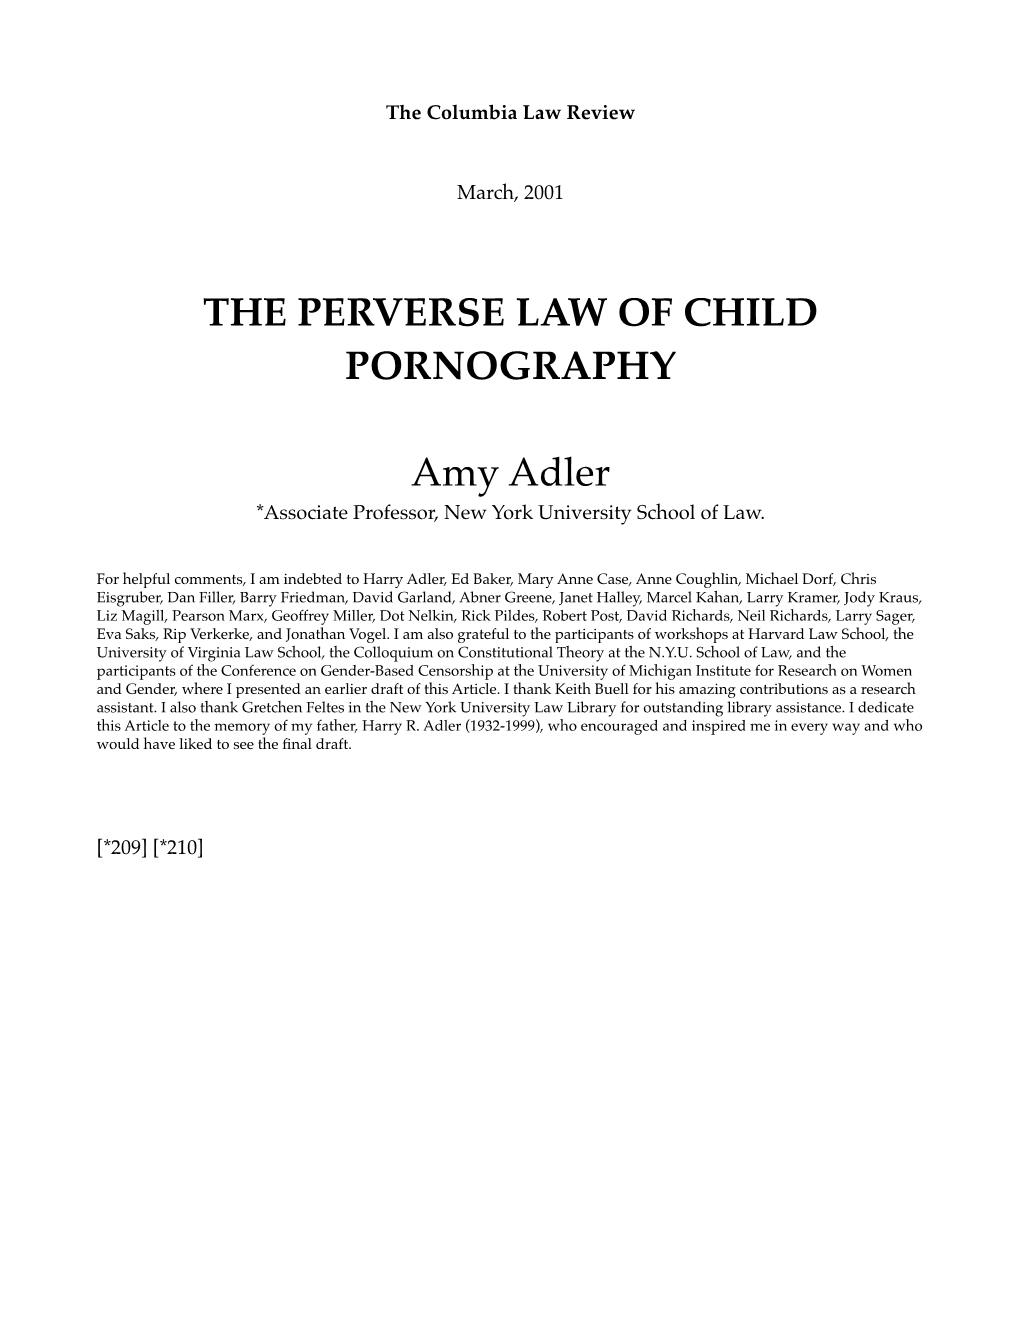 THE PERVERSE LAW of CHILD PORNOGRAPHY Amy Adler